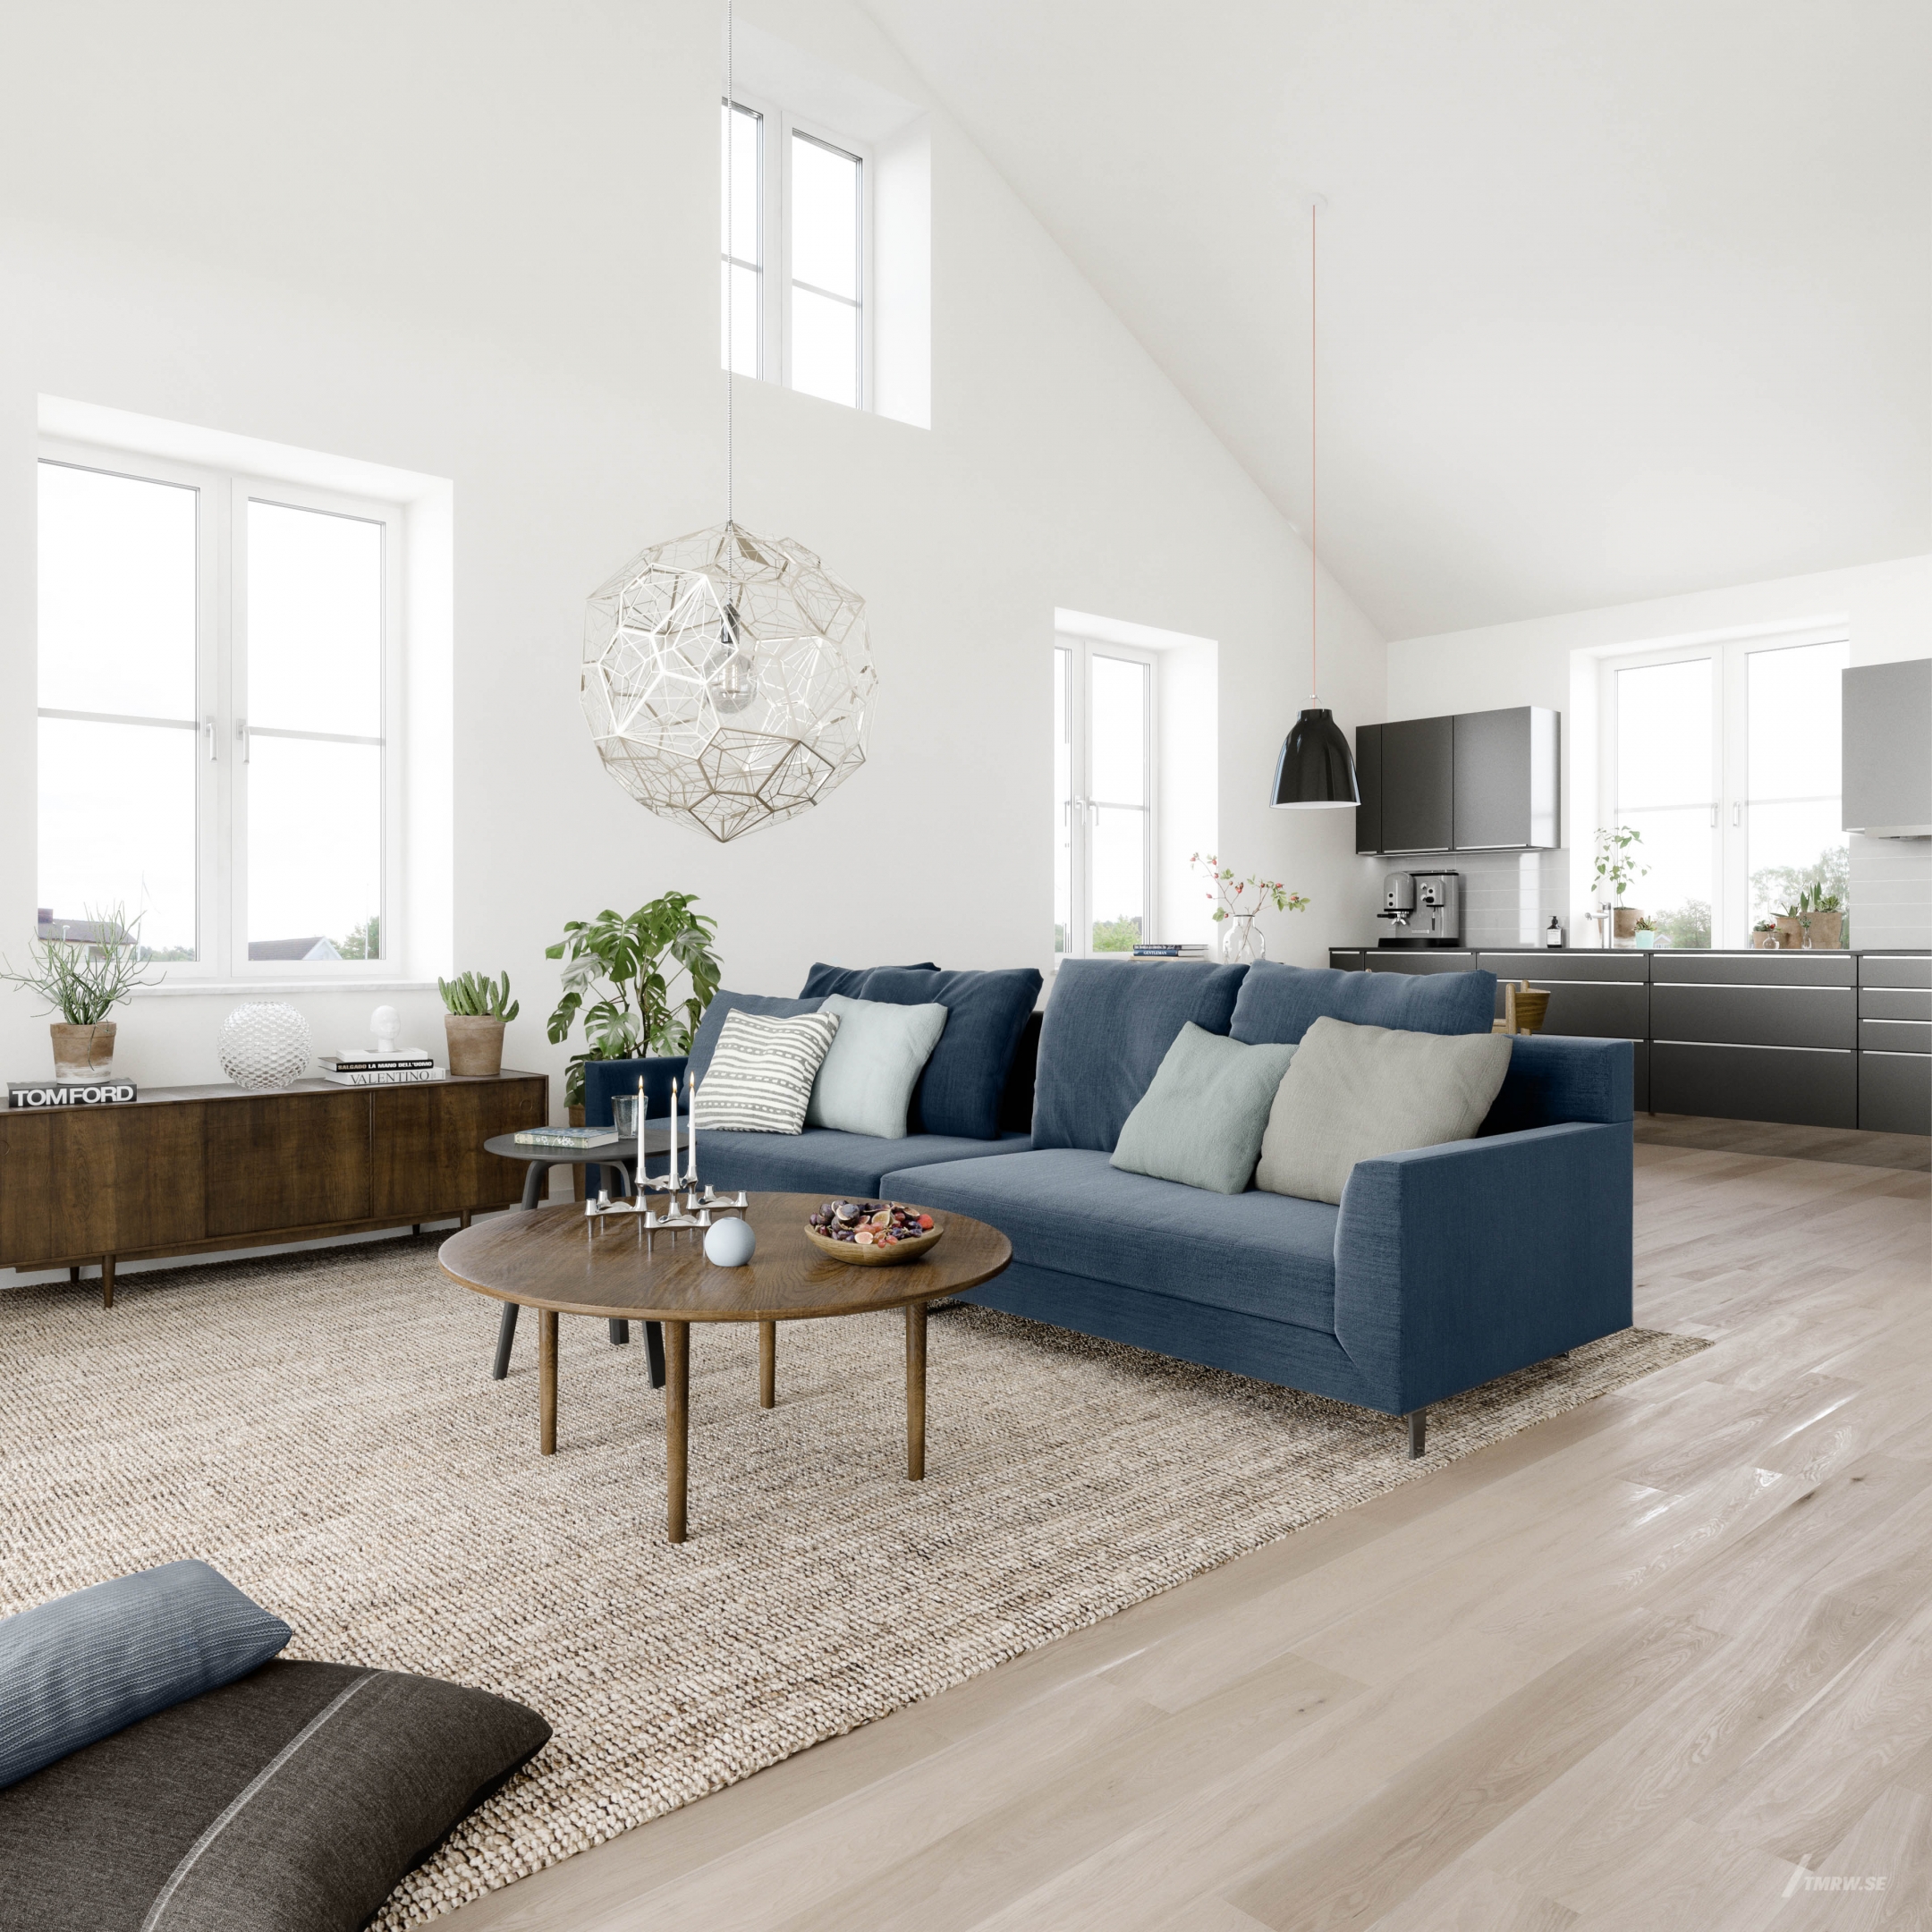 Architectural visualization of Amundön for HSB, a livingroom a interior in day light from a eye level view.